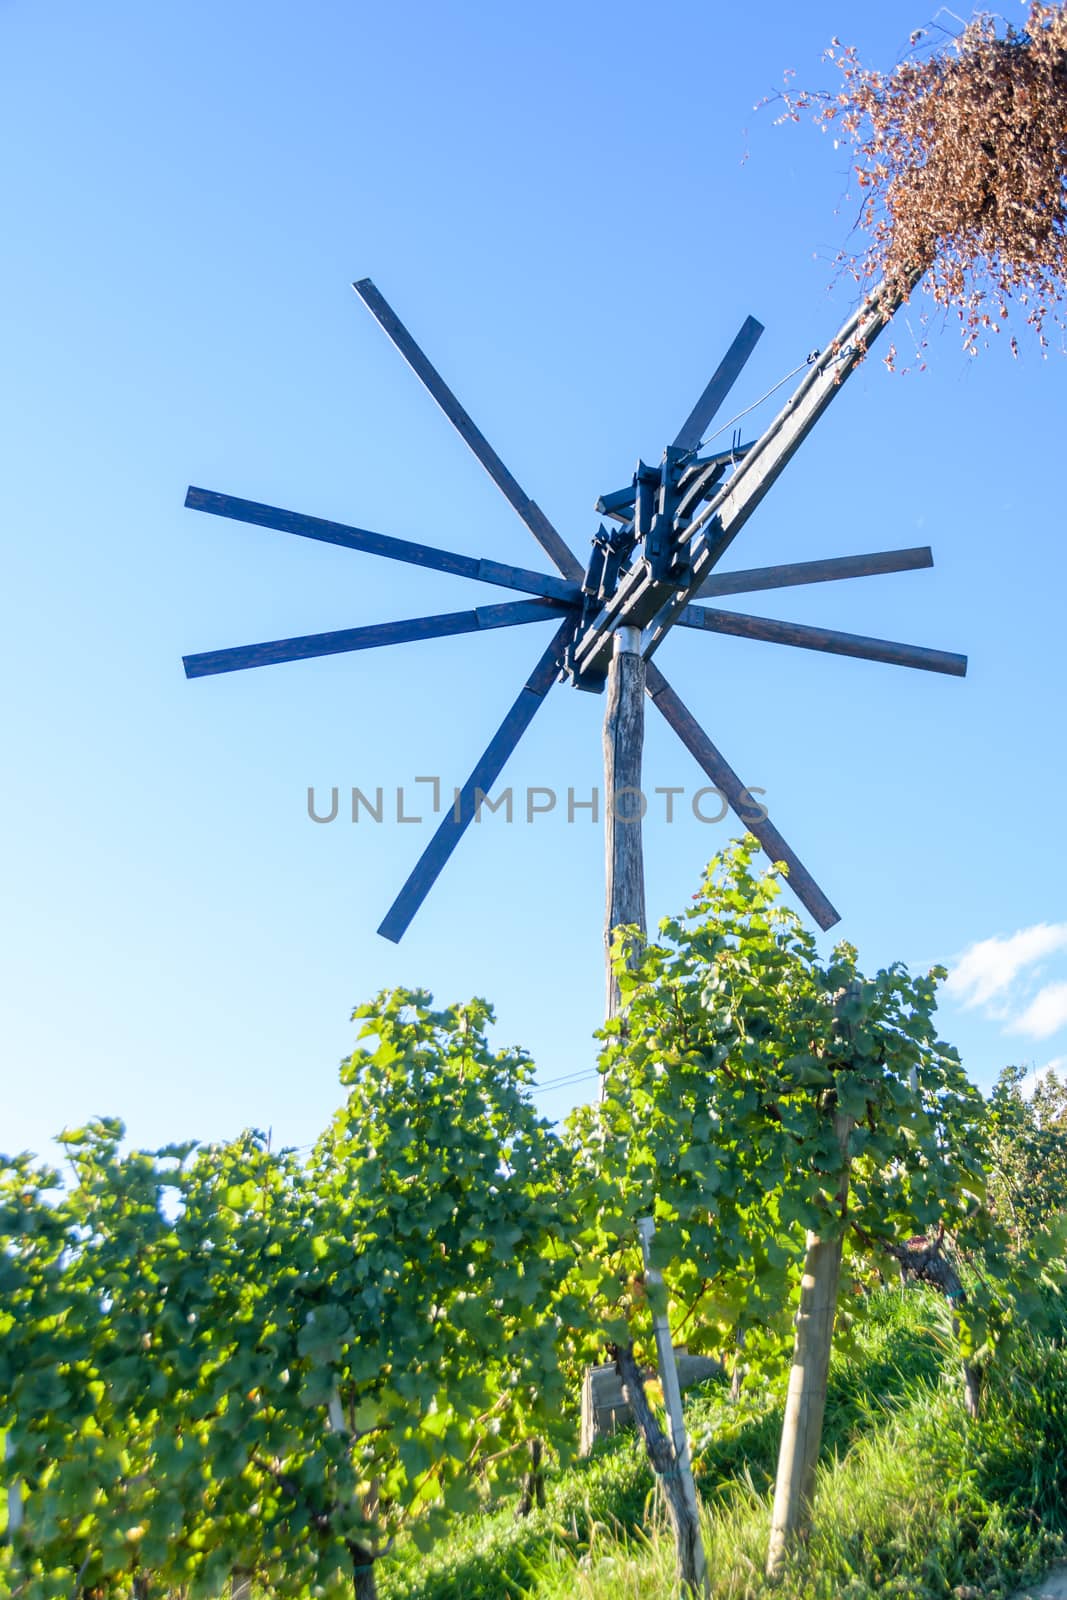 Klopotec, authentic traditional windmill slovenian wine road and local attraction unique to Slovenia by asafaric